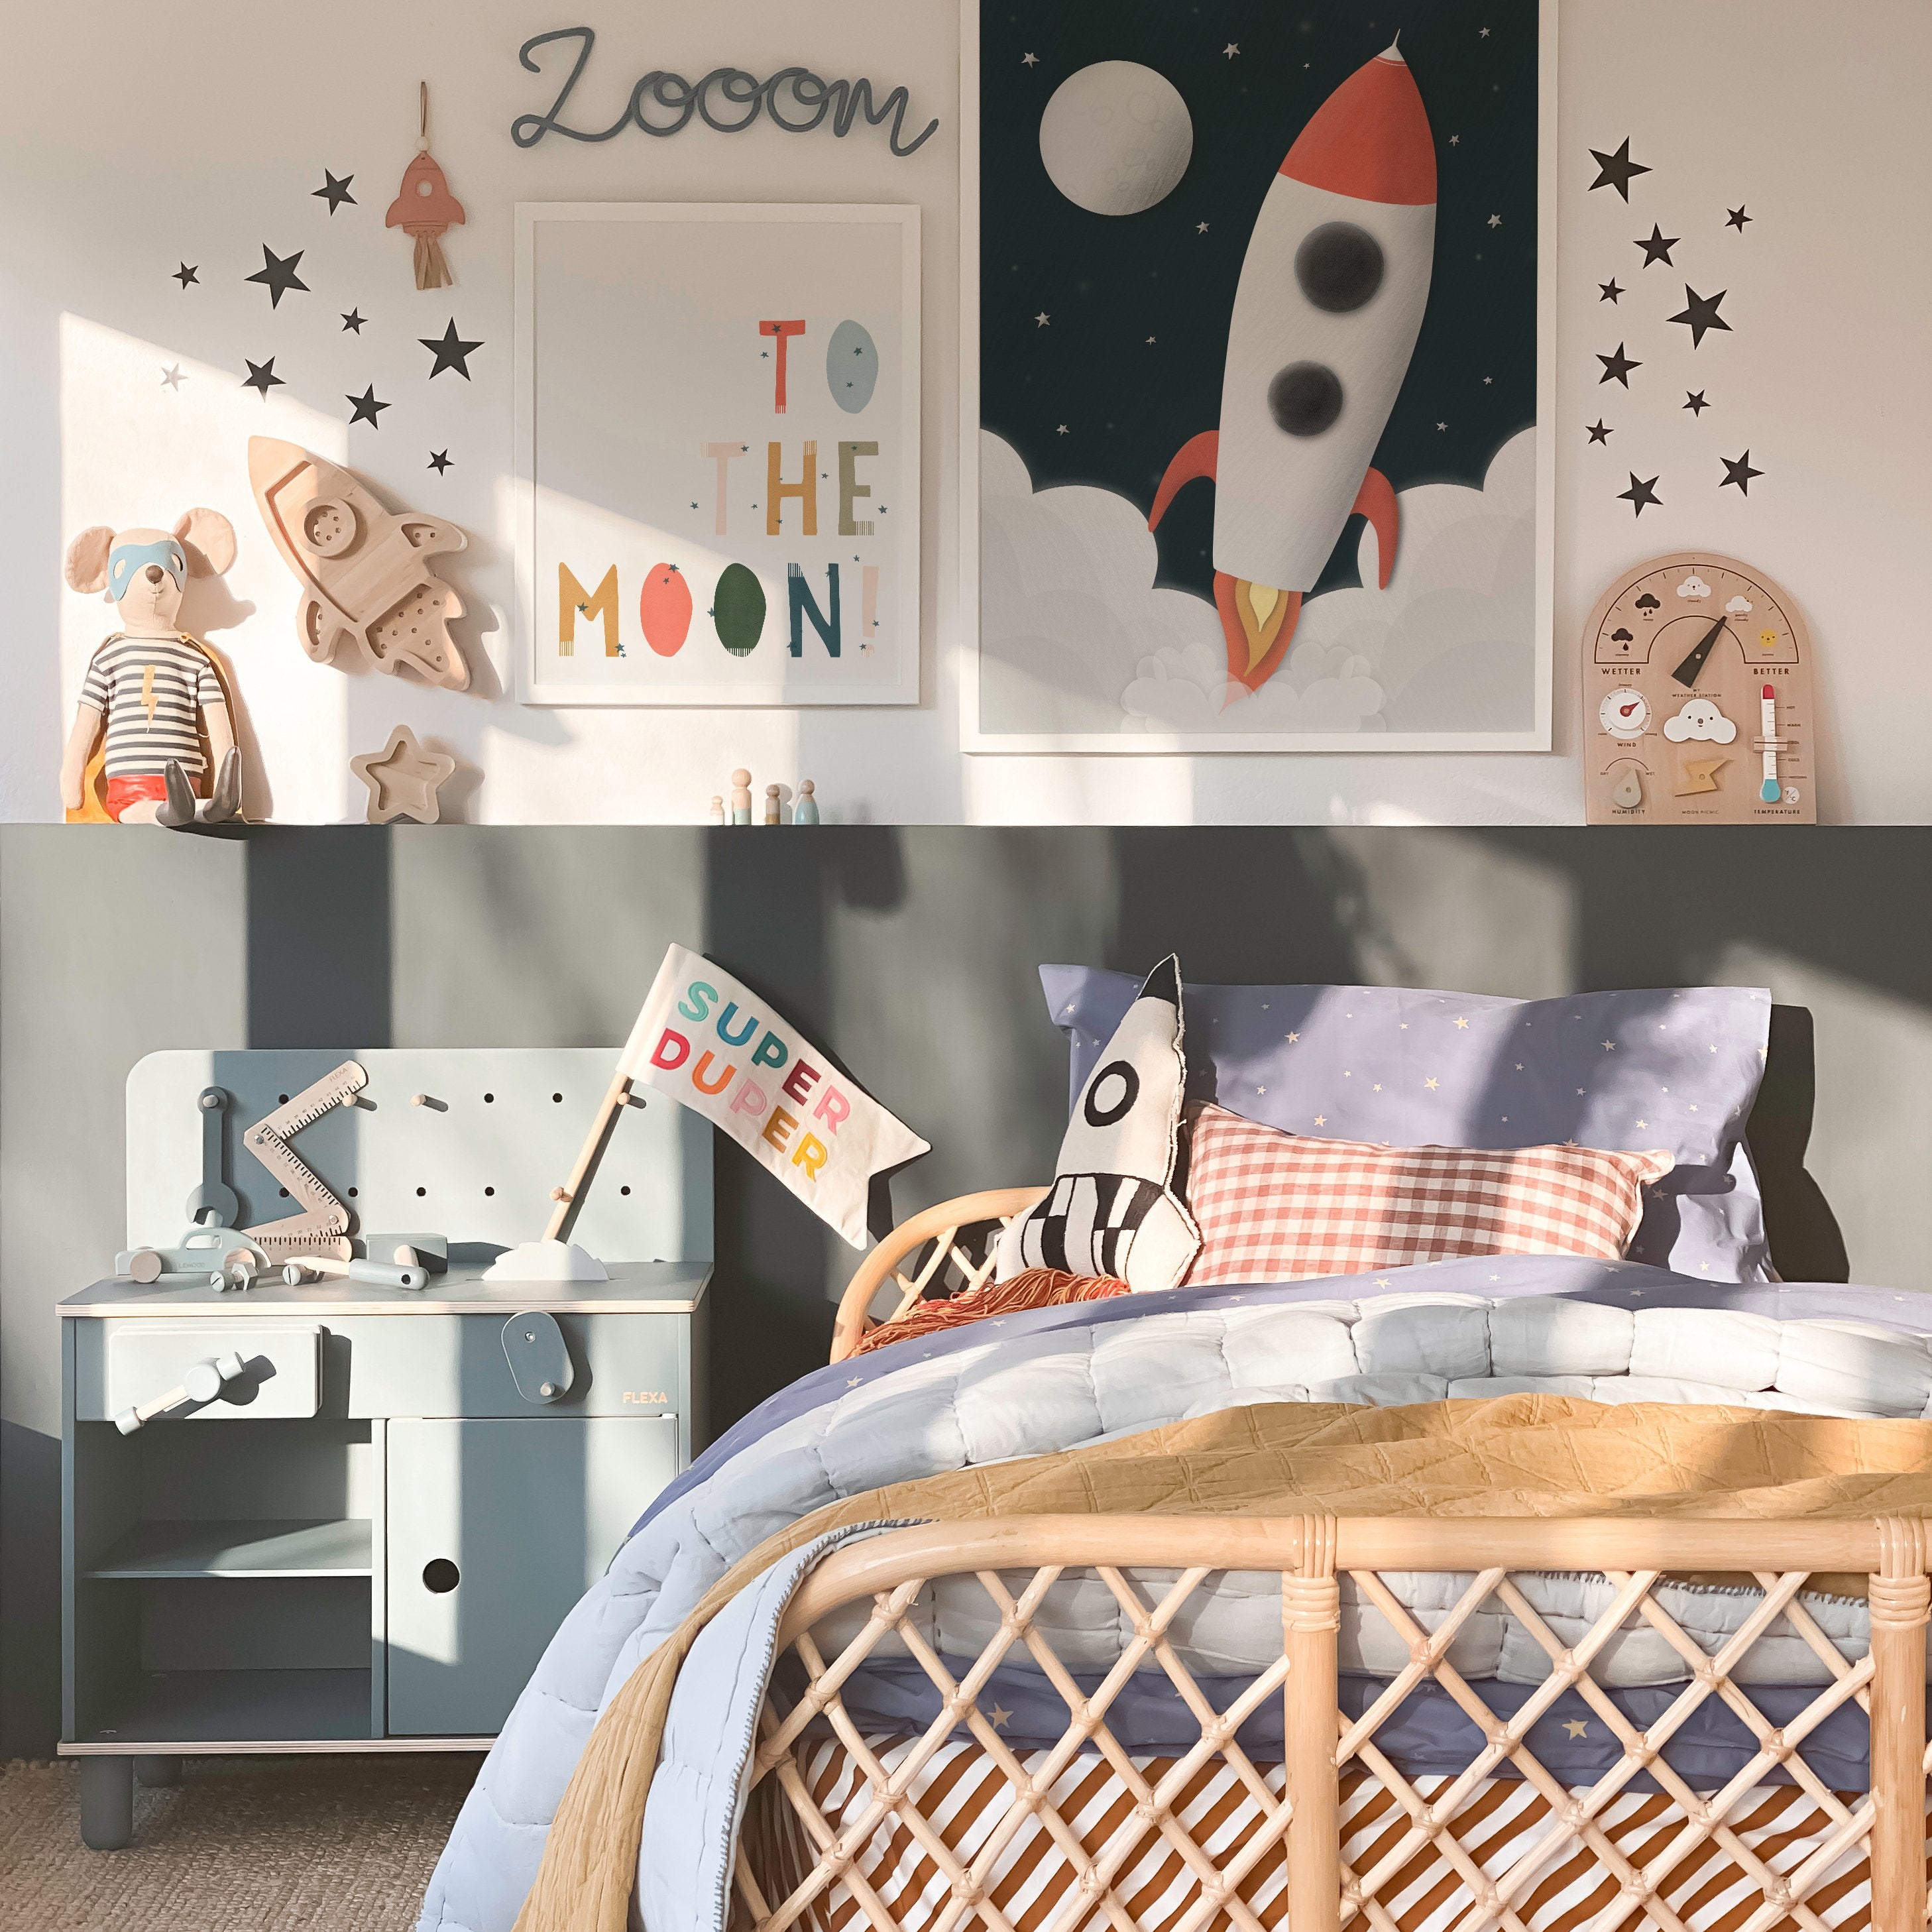 http://www.scandiborn.co.uk/cdn/shop/collections/square-kids-space--themed-room--rocket-cushion-boys-bedroom-ideas-railings-farrow-and-ball-on-wall-space-prints-posters_copy_e533818e-4158-467f-bebc-a850f37b3d41.jpg?v=1630400620